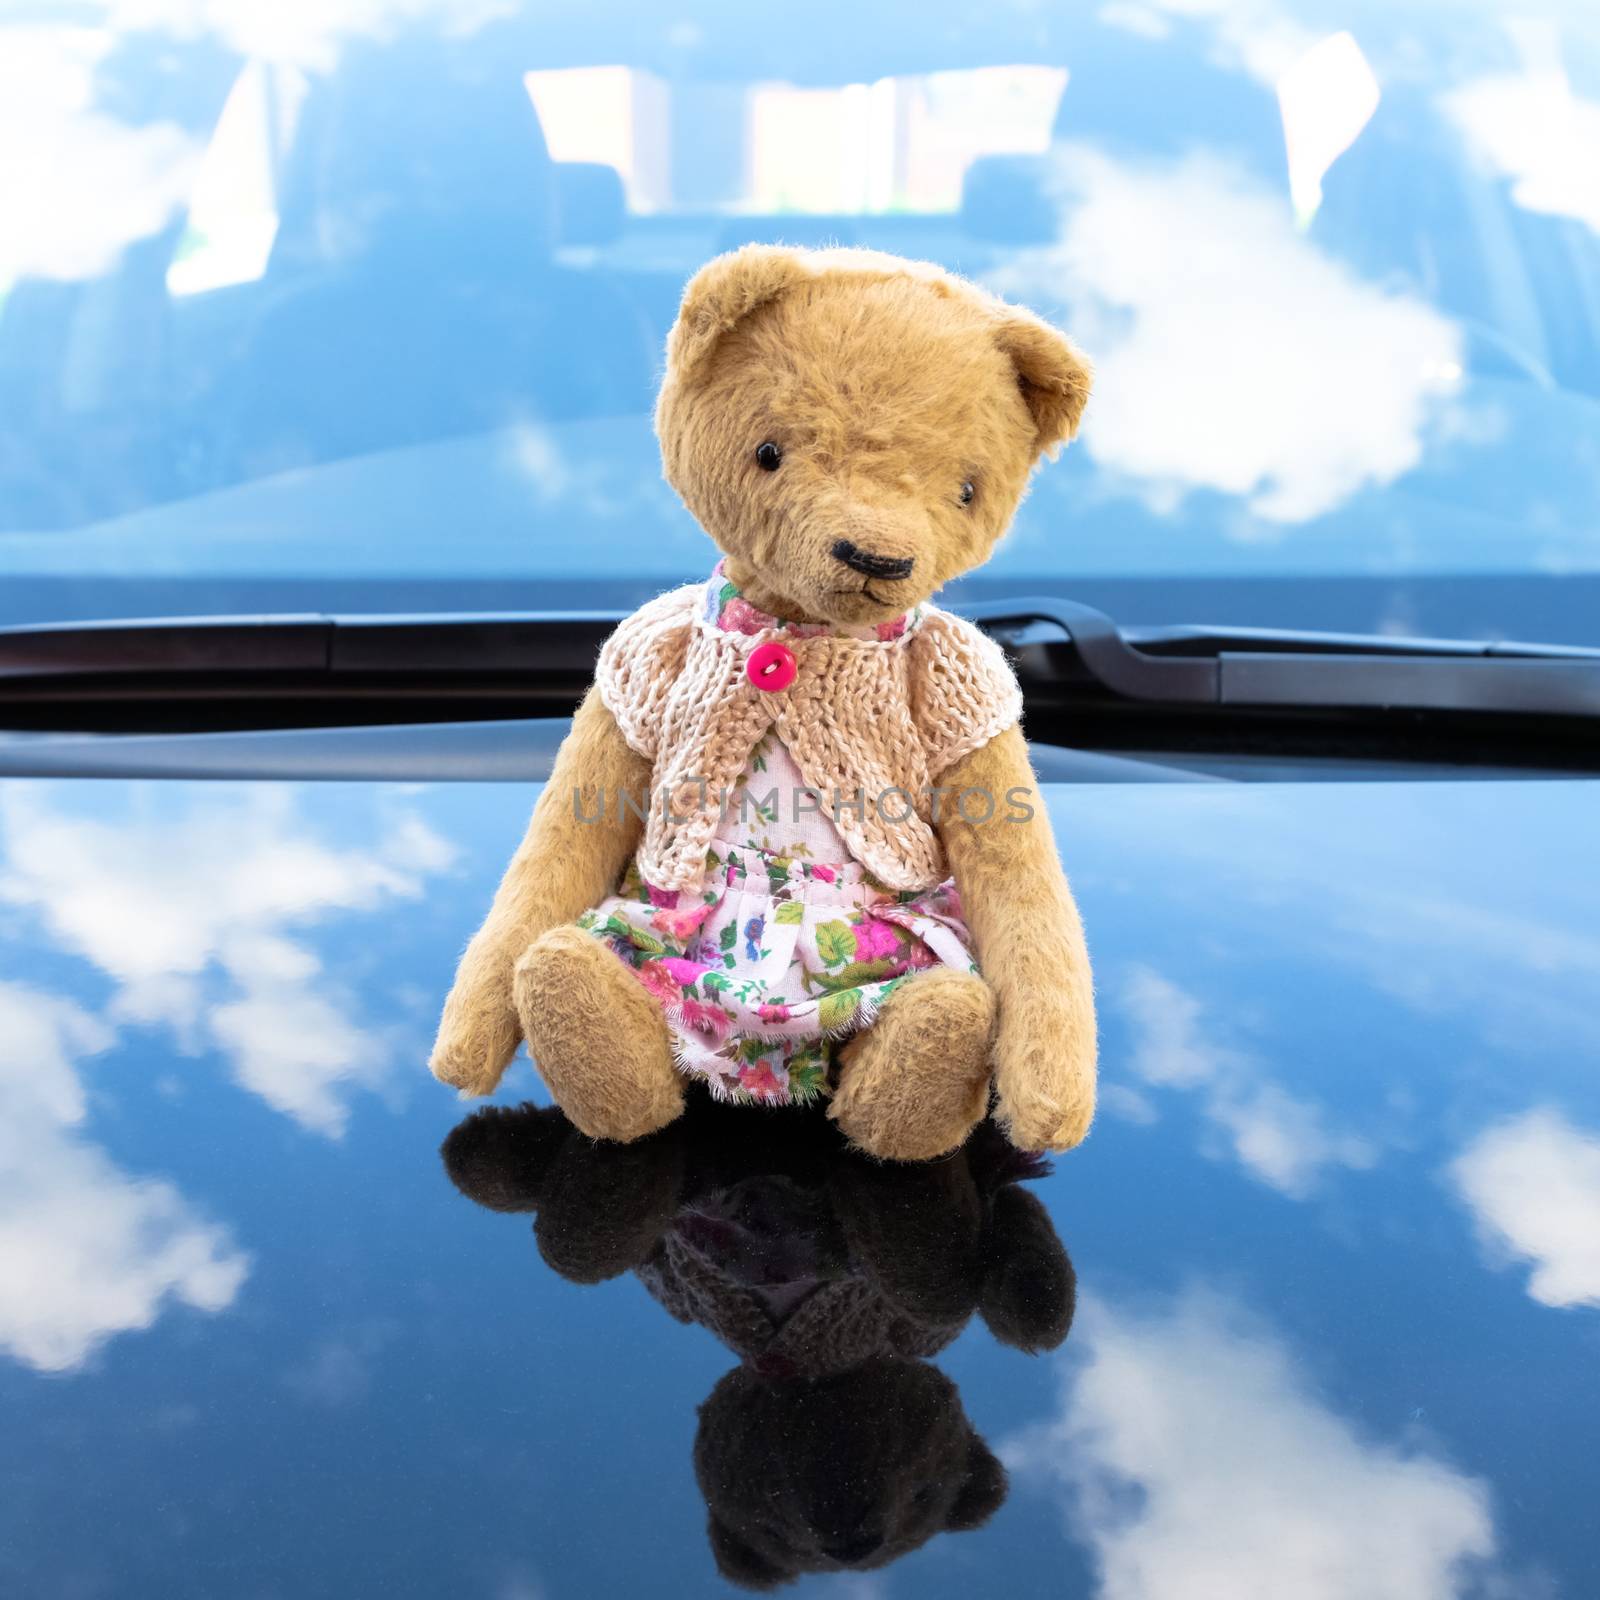 Teddy Bear doll seating on a car bonnet with reflection of sky and clouds